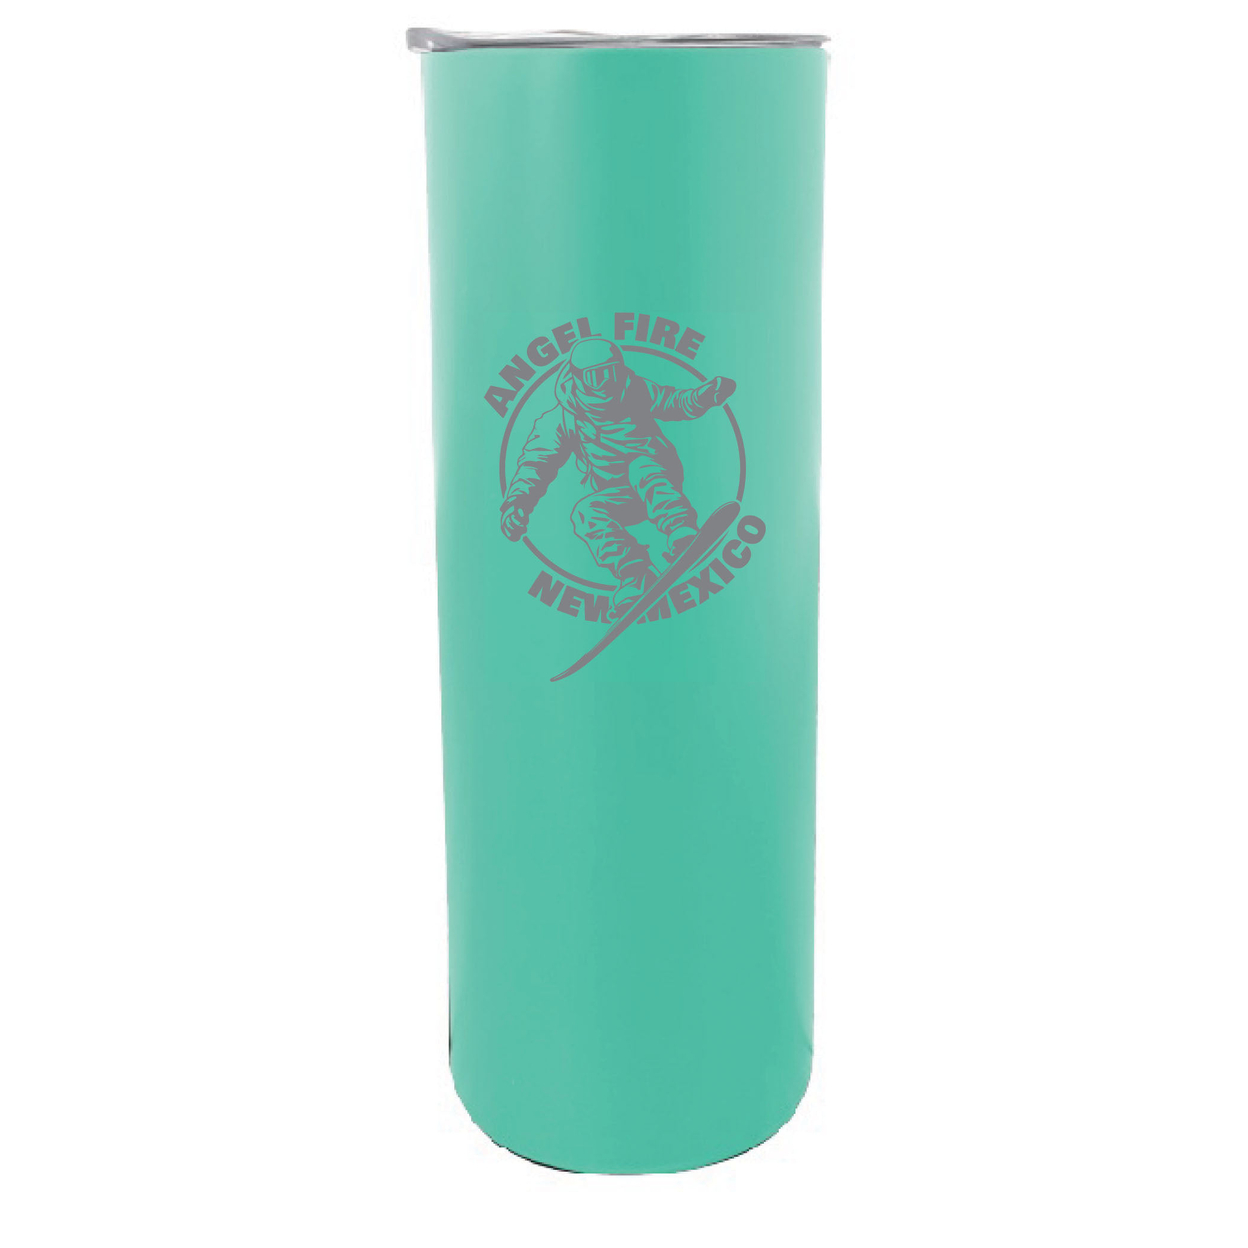 Angel Fire New Mexico Souvenir 20 Oz Engraved Insulated Stainless Steel Skinny Tumbler - Seafoam,,2-Pack